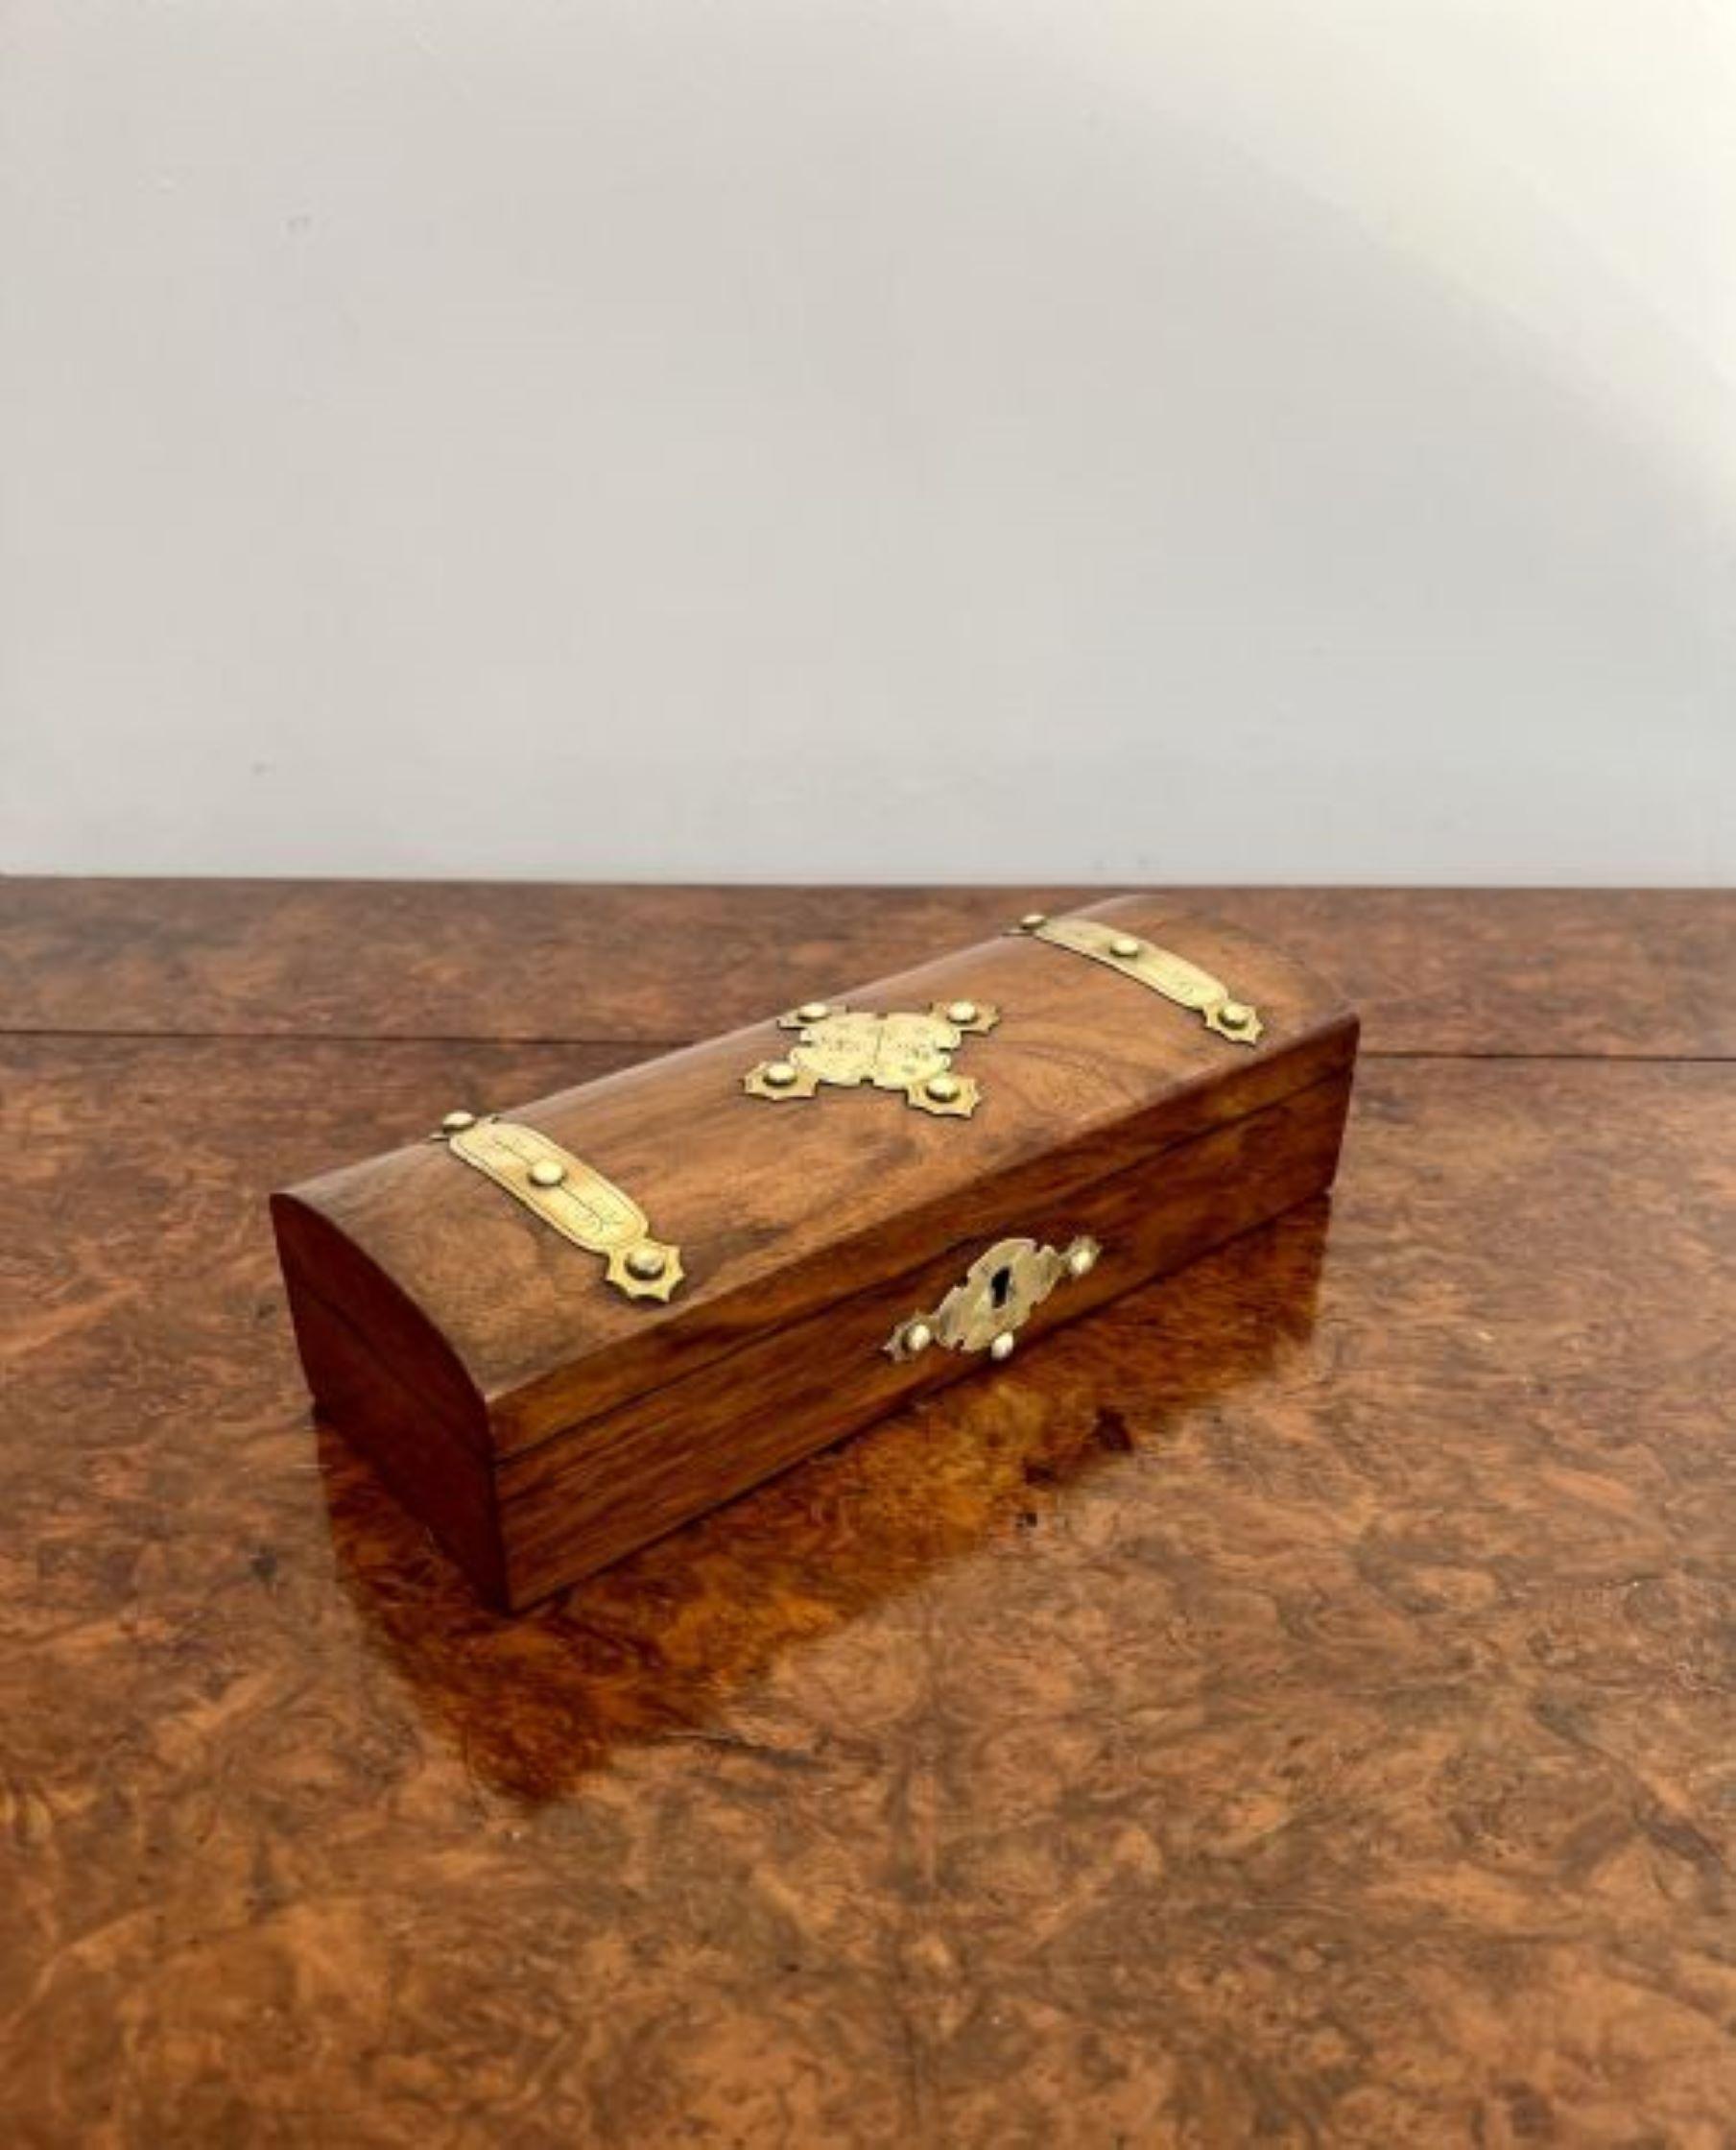 Antique Victorian quality burr walnut and brass mounted glove box having a quality burr walnut glove box with original engraved mounts a dome shaped lid opening to reveal a storage compartment.